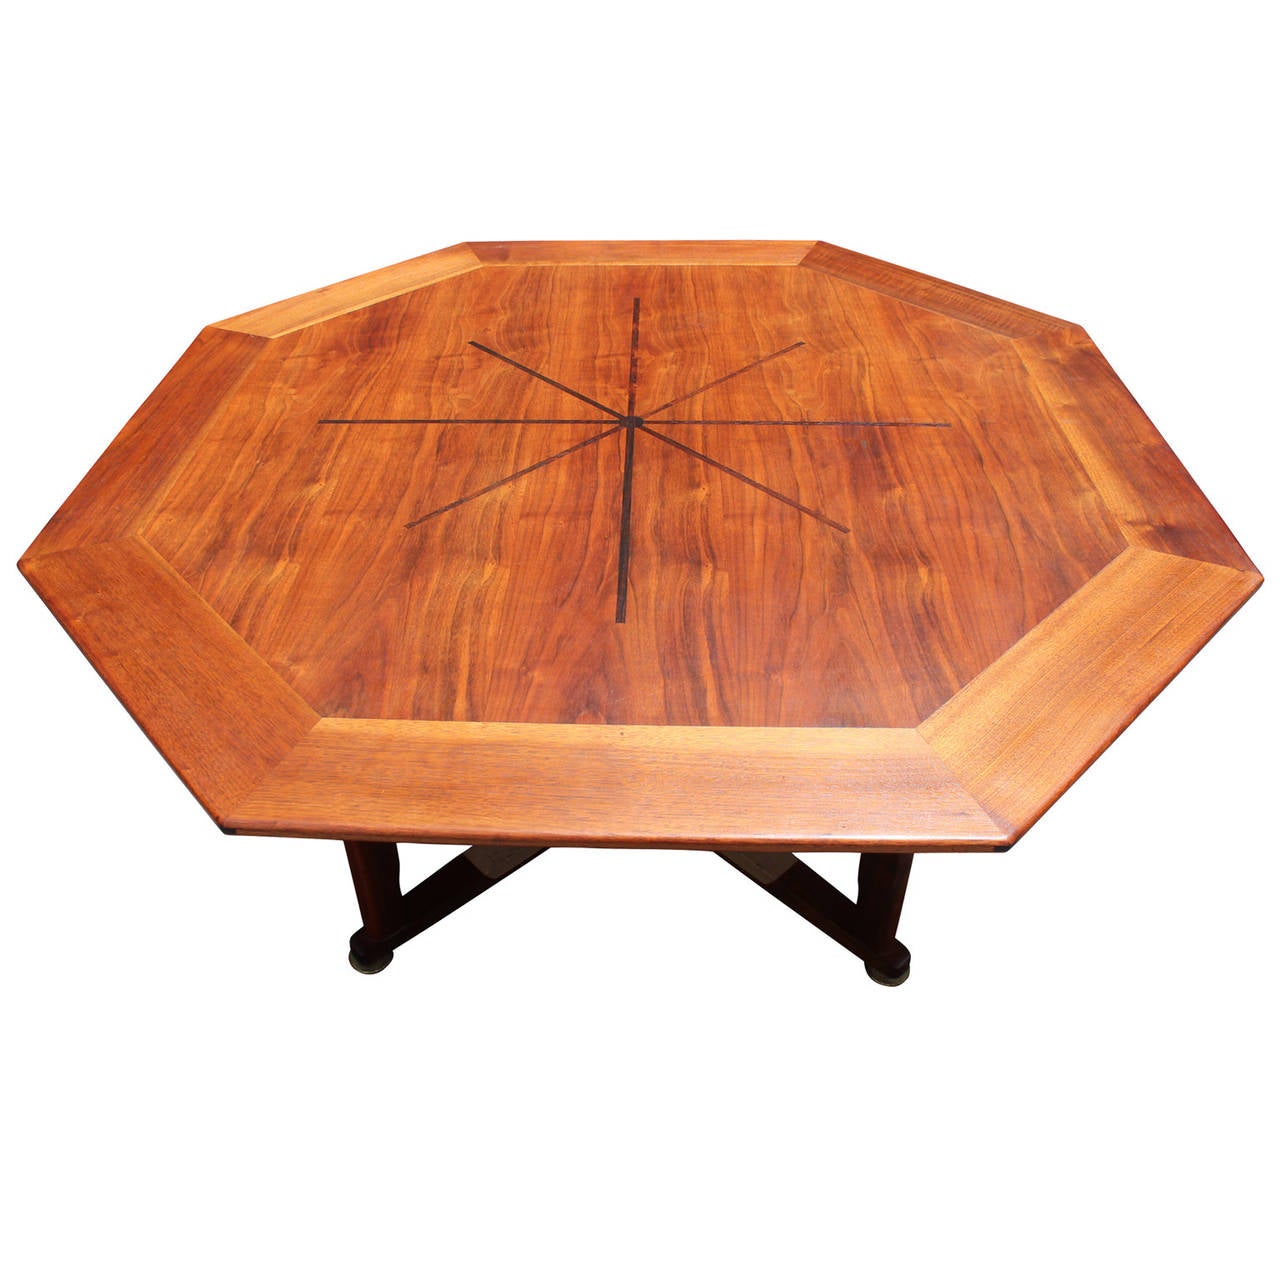 American Beautiful Janus Game Table by Edward Wormley for Dunbar